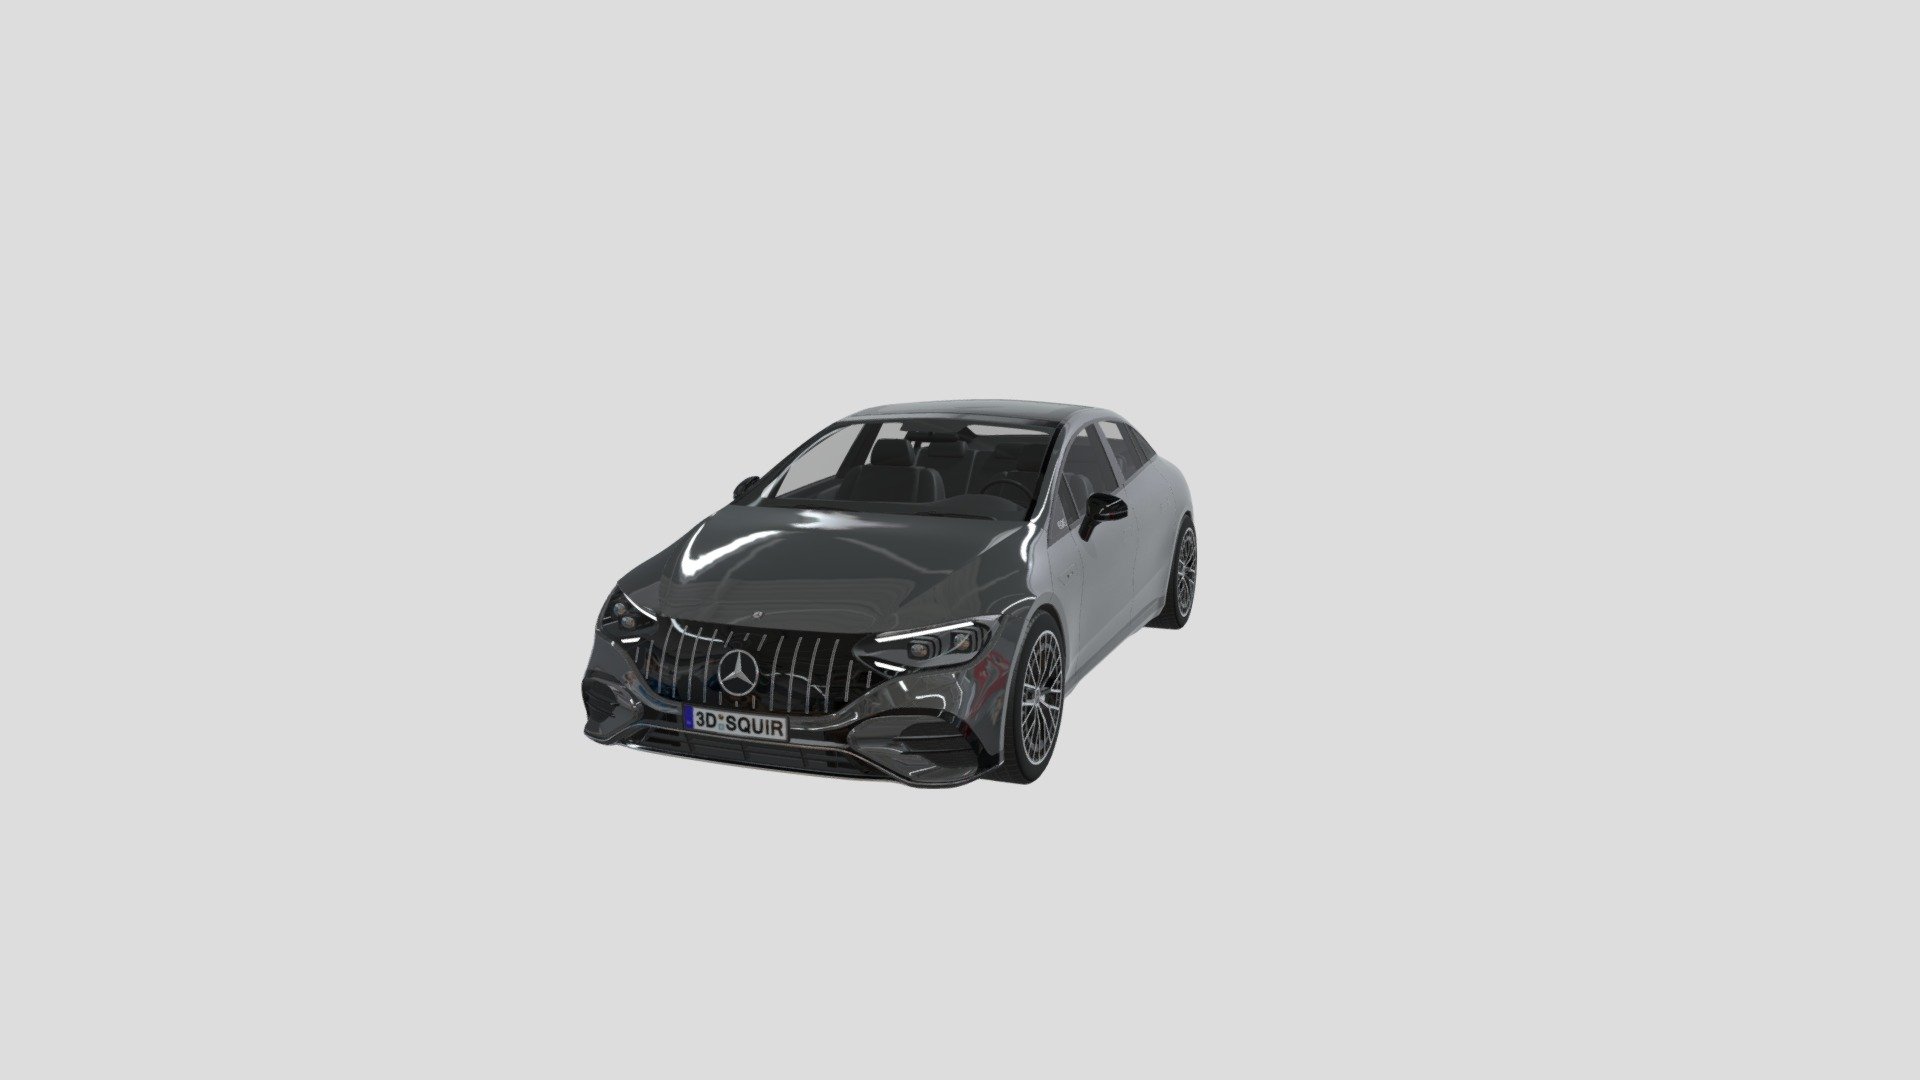 The Mercedes-Benz EQE (V295) is a battery electric executive car produced by German automobile manufacturer Daimler AG. It is part of the Mercedes-Benz EQ family, and was presented at the Munich Motor Show 2021. The only model available at launch has been the rear-motor EQE 350. Its motoe has a peak power of 215 kW (288 hp), and it has a range of up to 660 km (410 mi). More variants are said to follow later, including a 4Matic AWD dual-motor setup with a peak motor power output of up to 500 kW (671 hp) 3d model